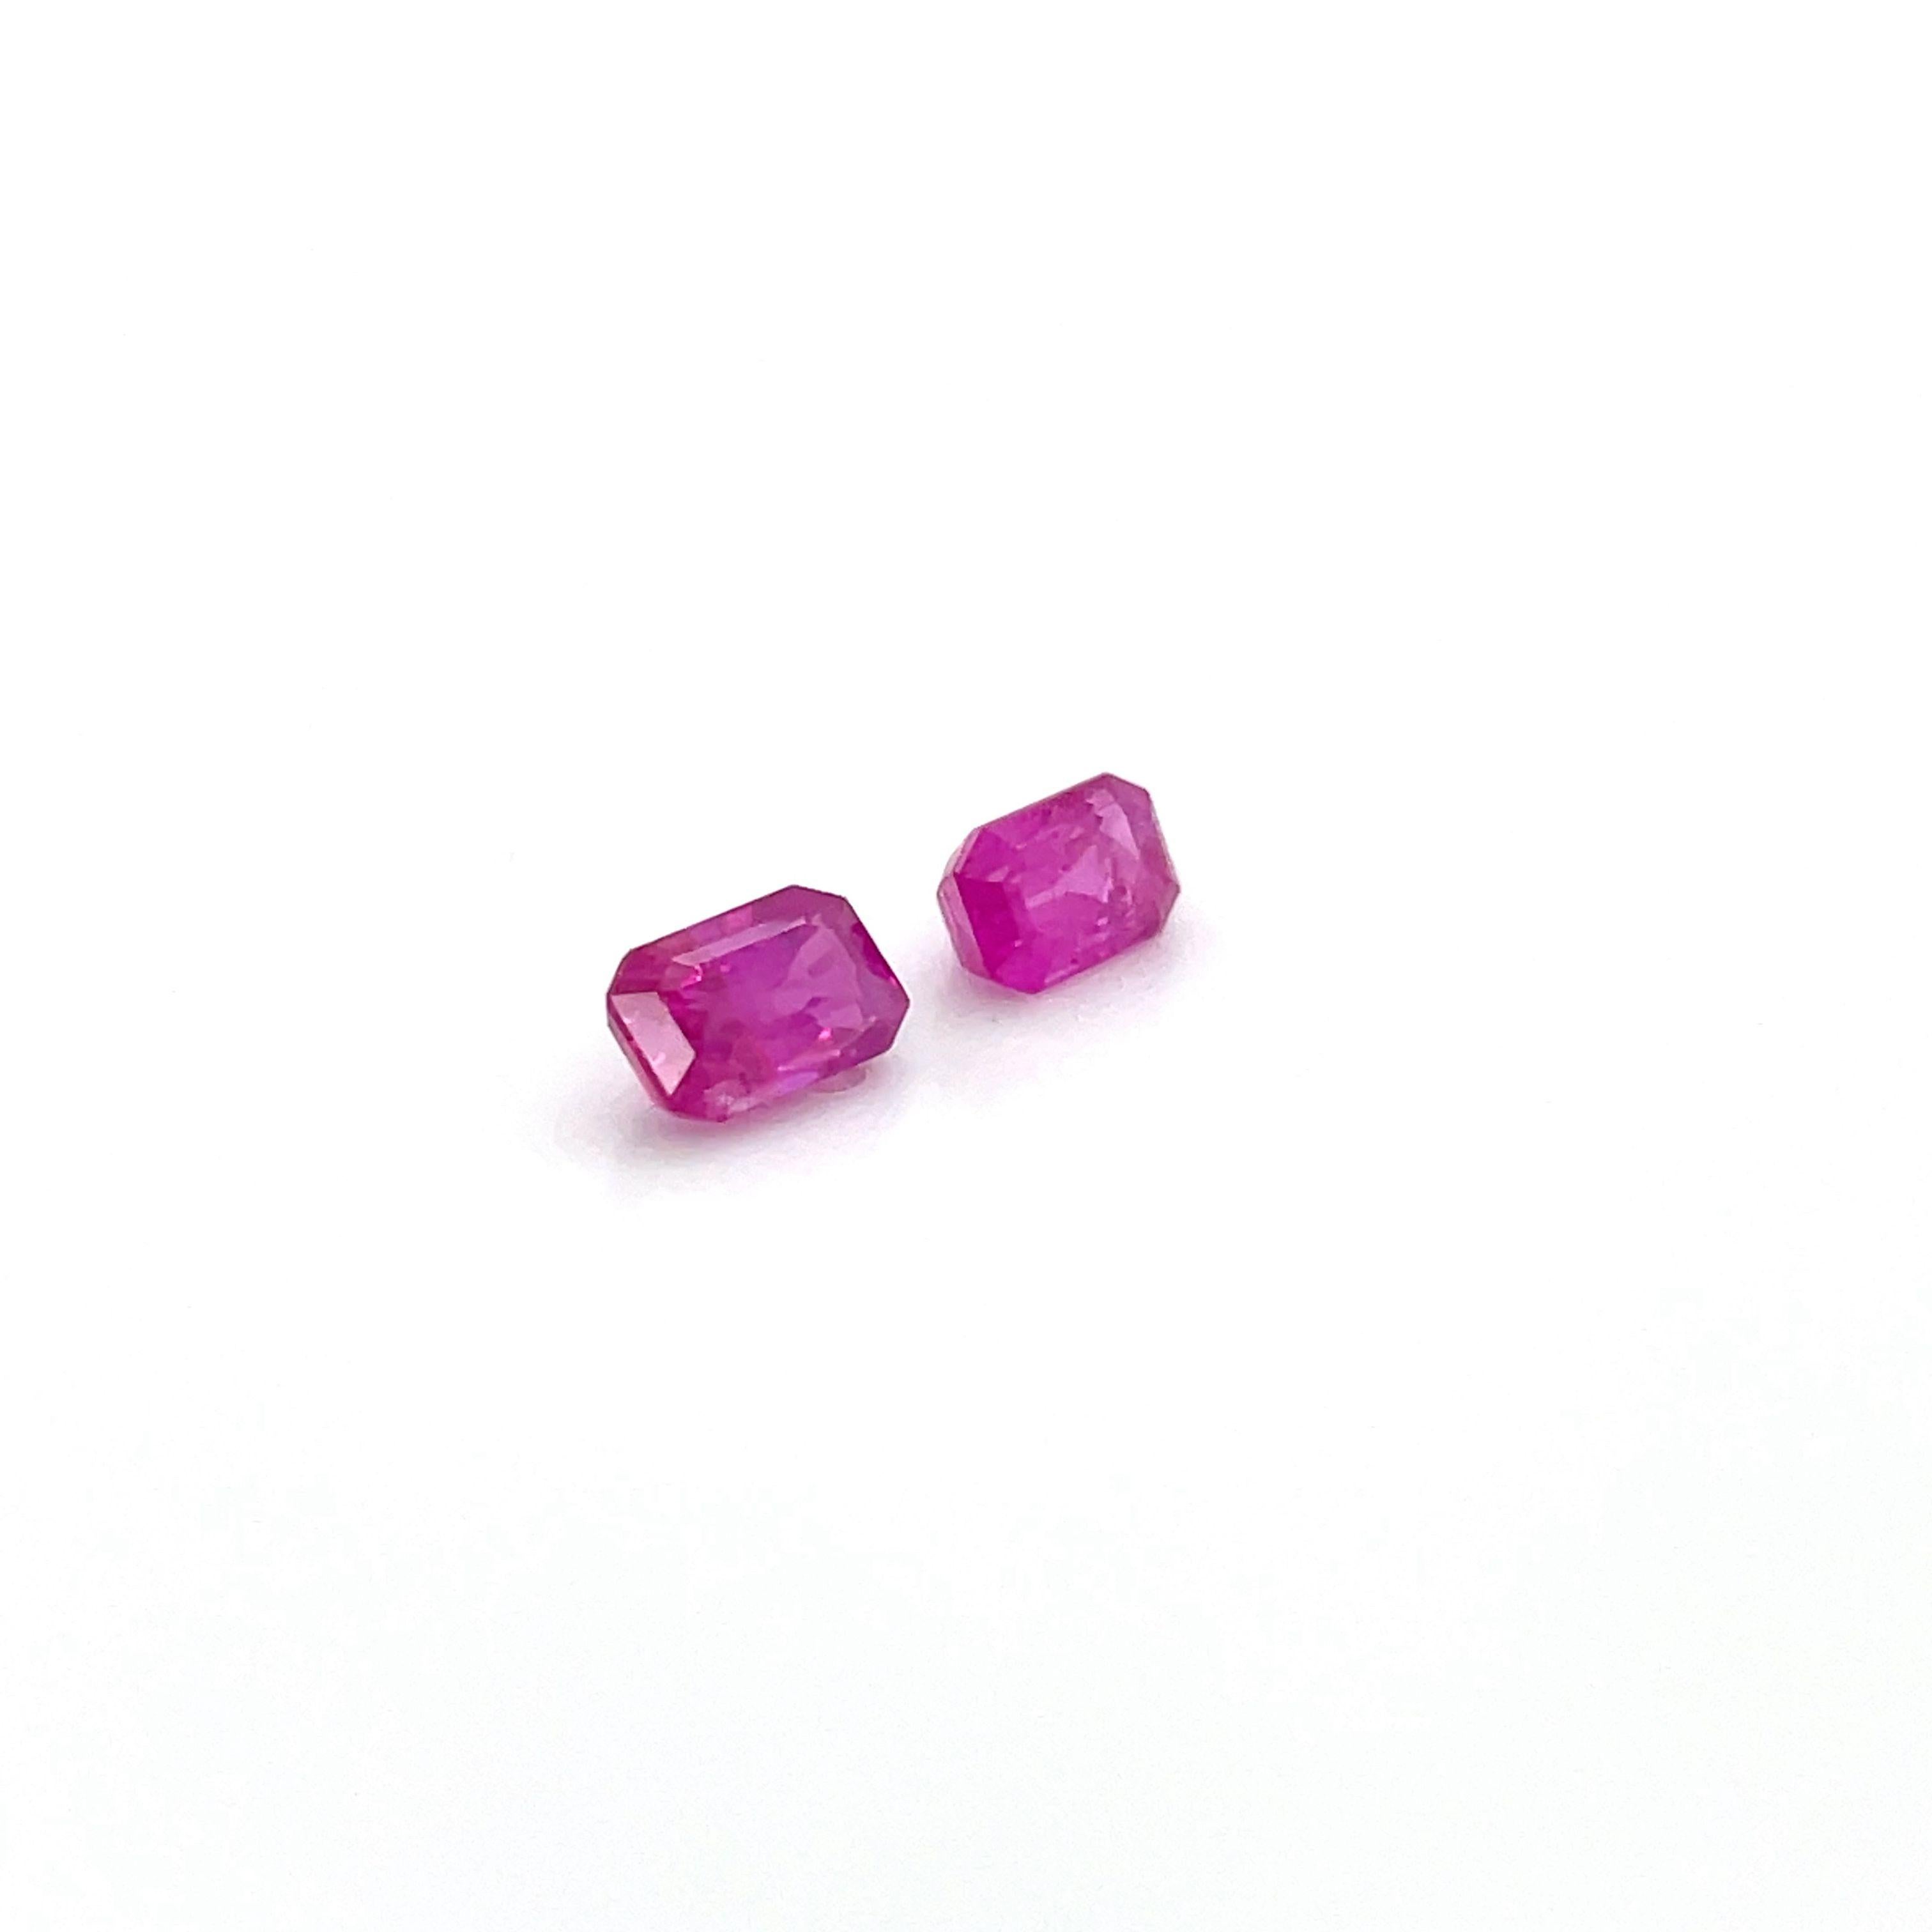 2 Rubies 2.22 Cts  For Sale 9